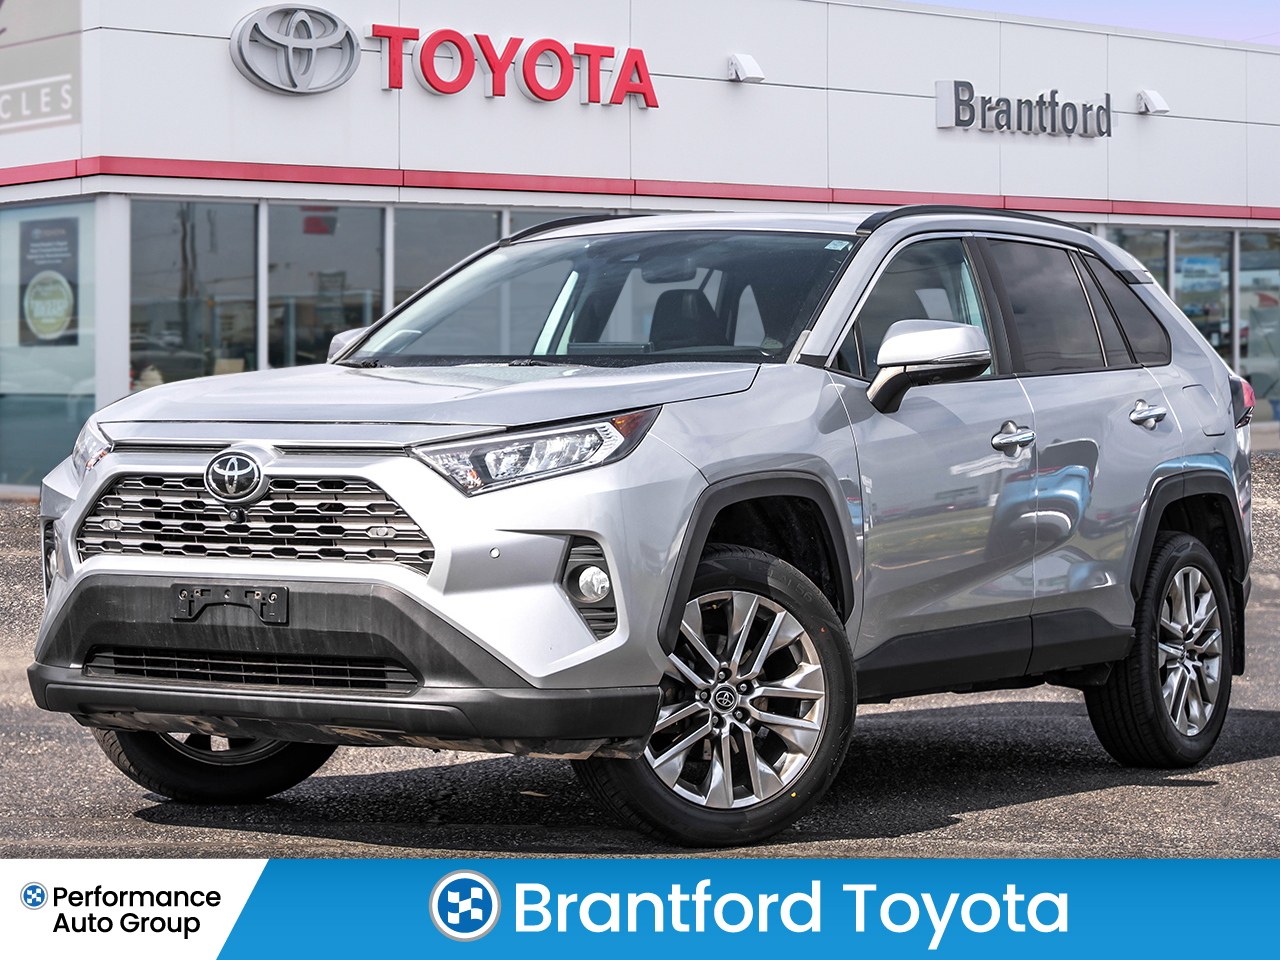 2019 Toyota RAV4 LIMITED - AWD - LEATHER - TOP OF THE FOOD CHAIN